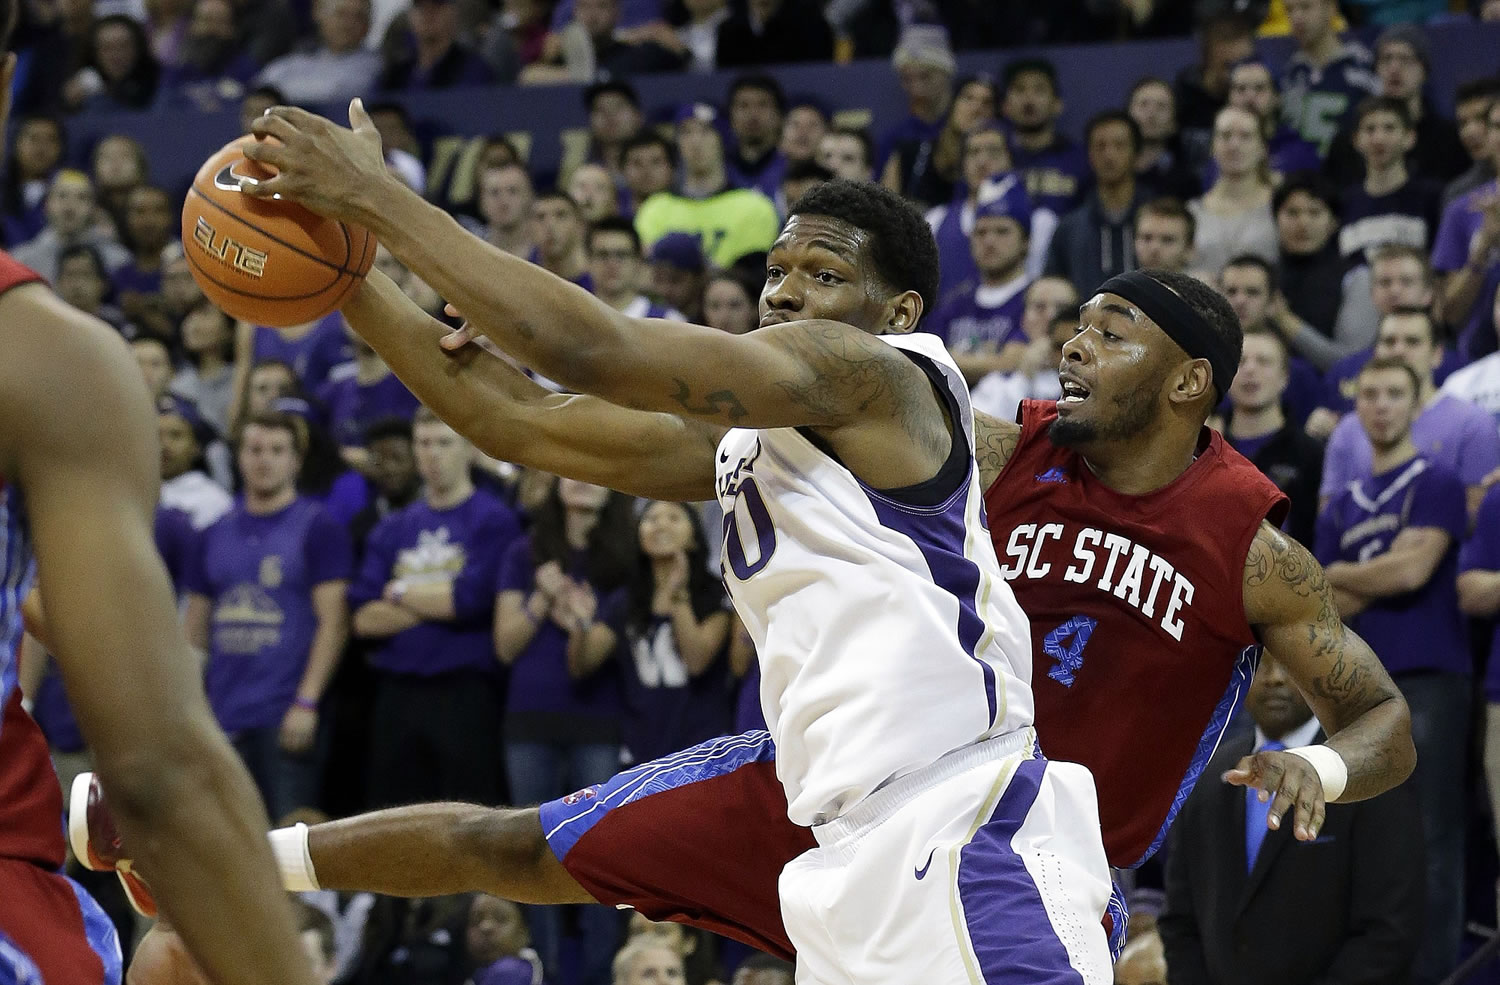 Washington's Shawn Kemp Jr., left, reaches for the ball in front of South Carolina State's Patrick Kirksey in the first half Friday, Nov. 14, 2014, in Seattle.